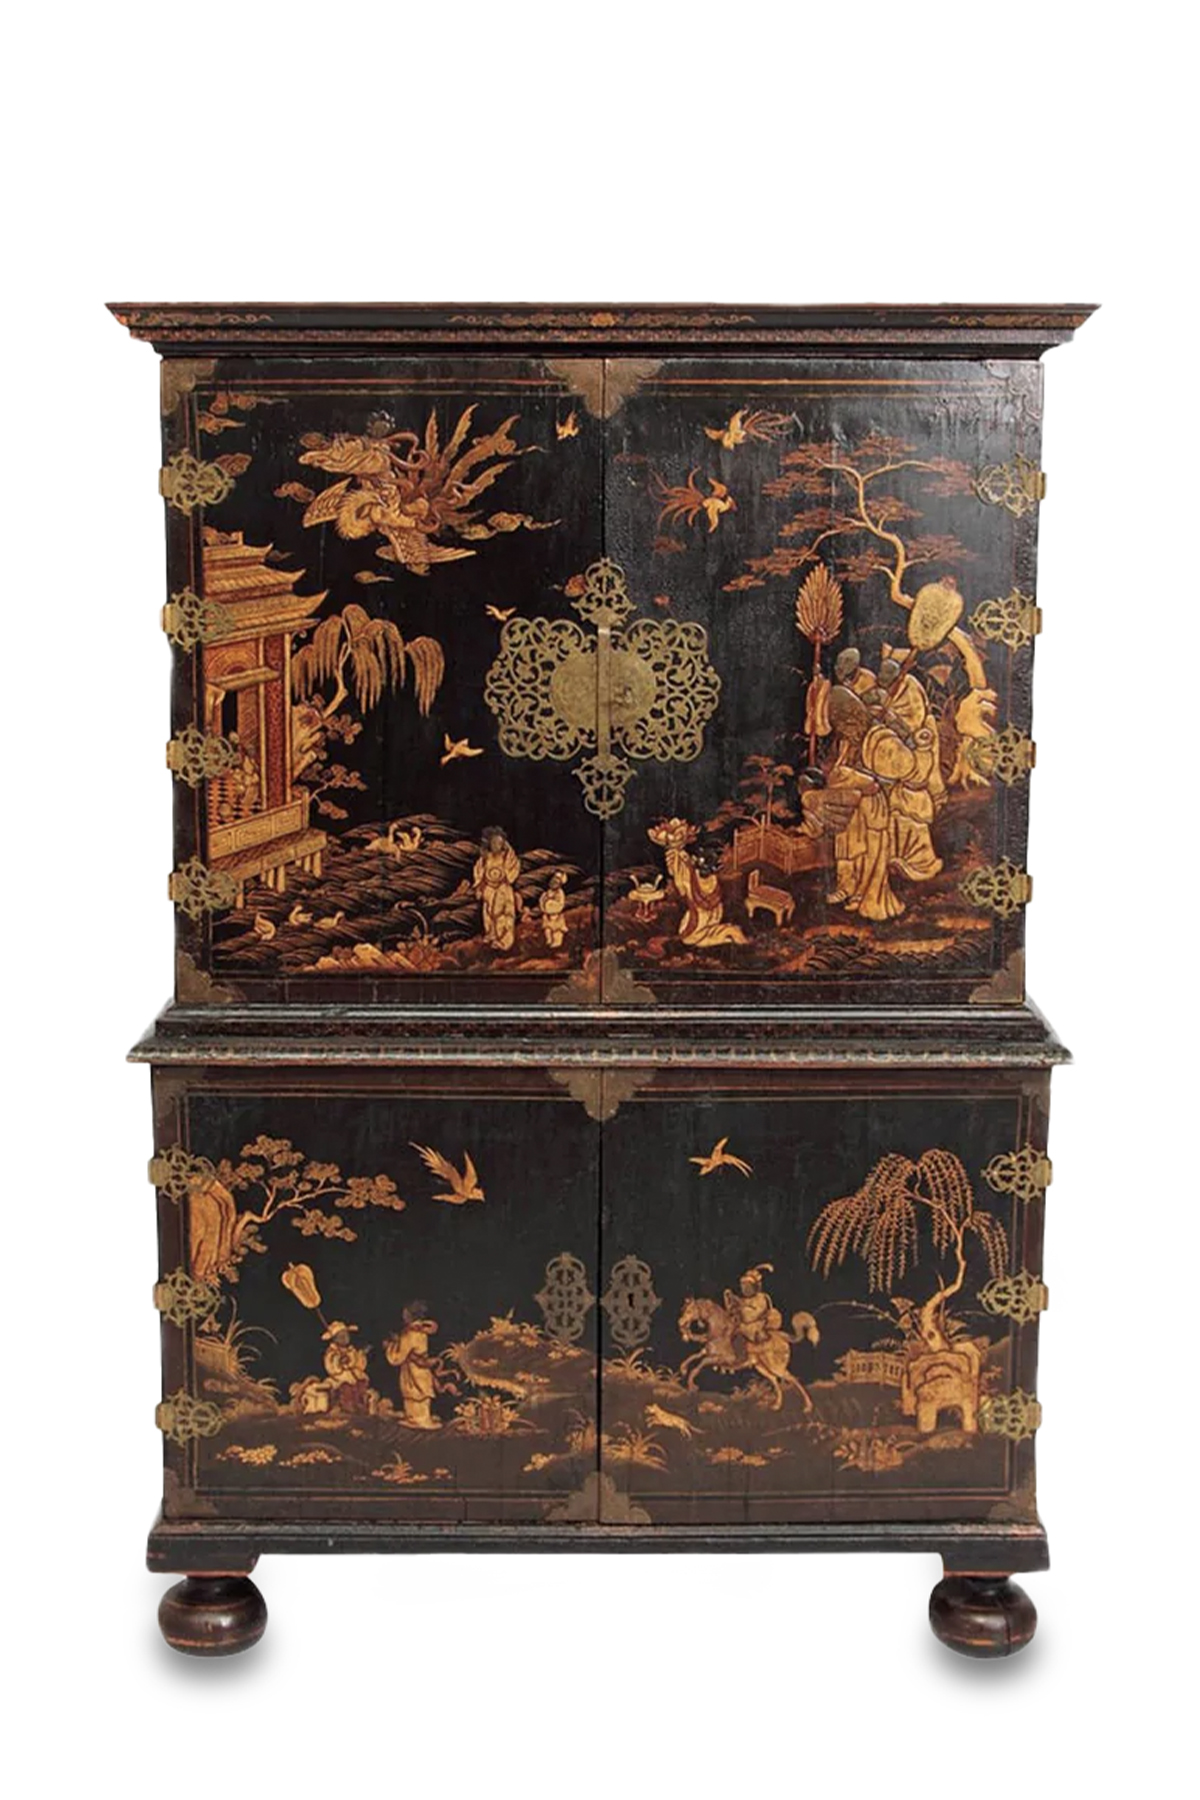 Queen Anne Collectors Cabinet from Nick Brock Antiques